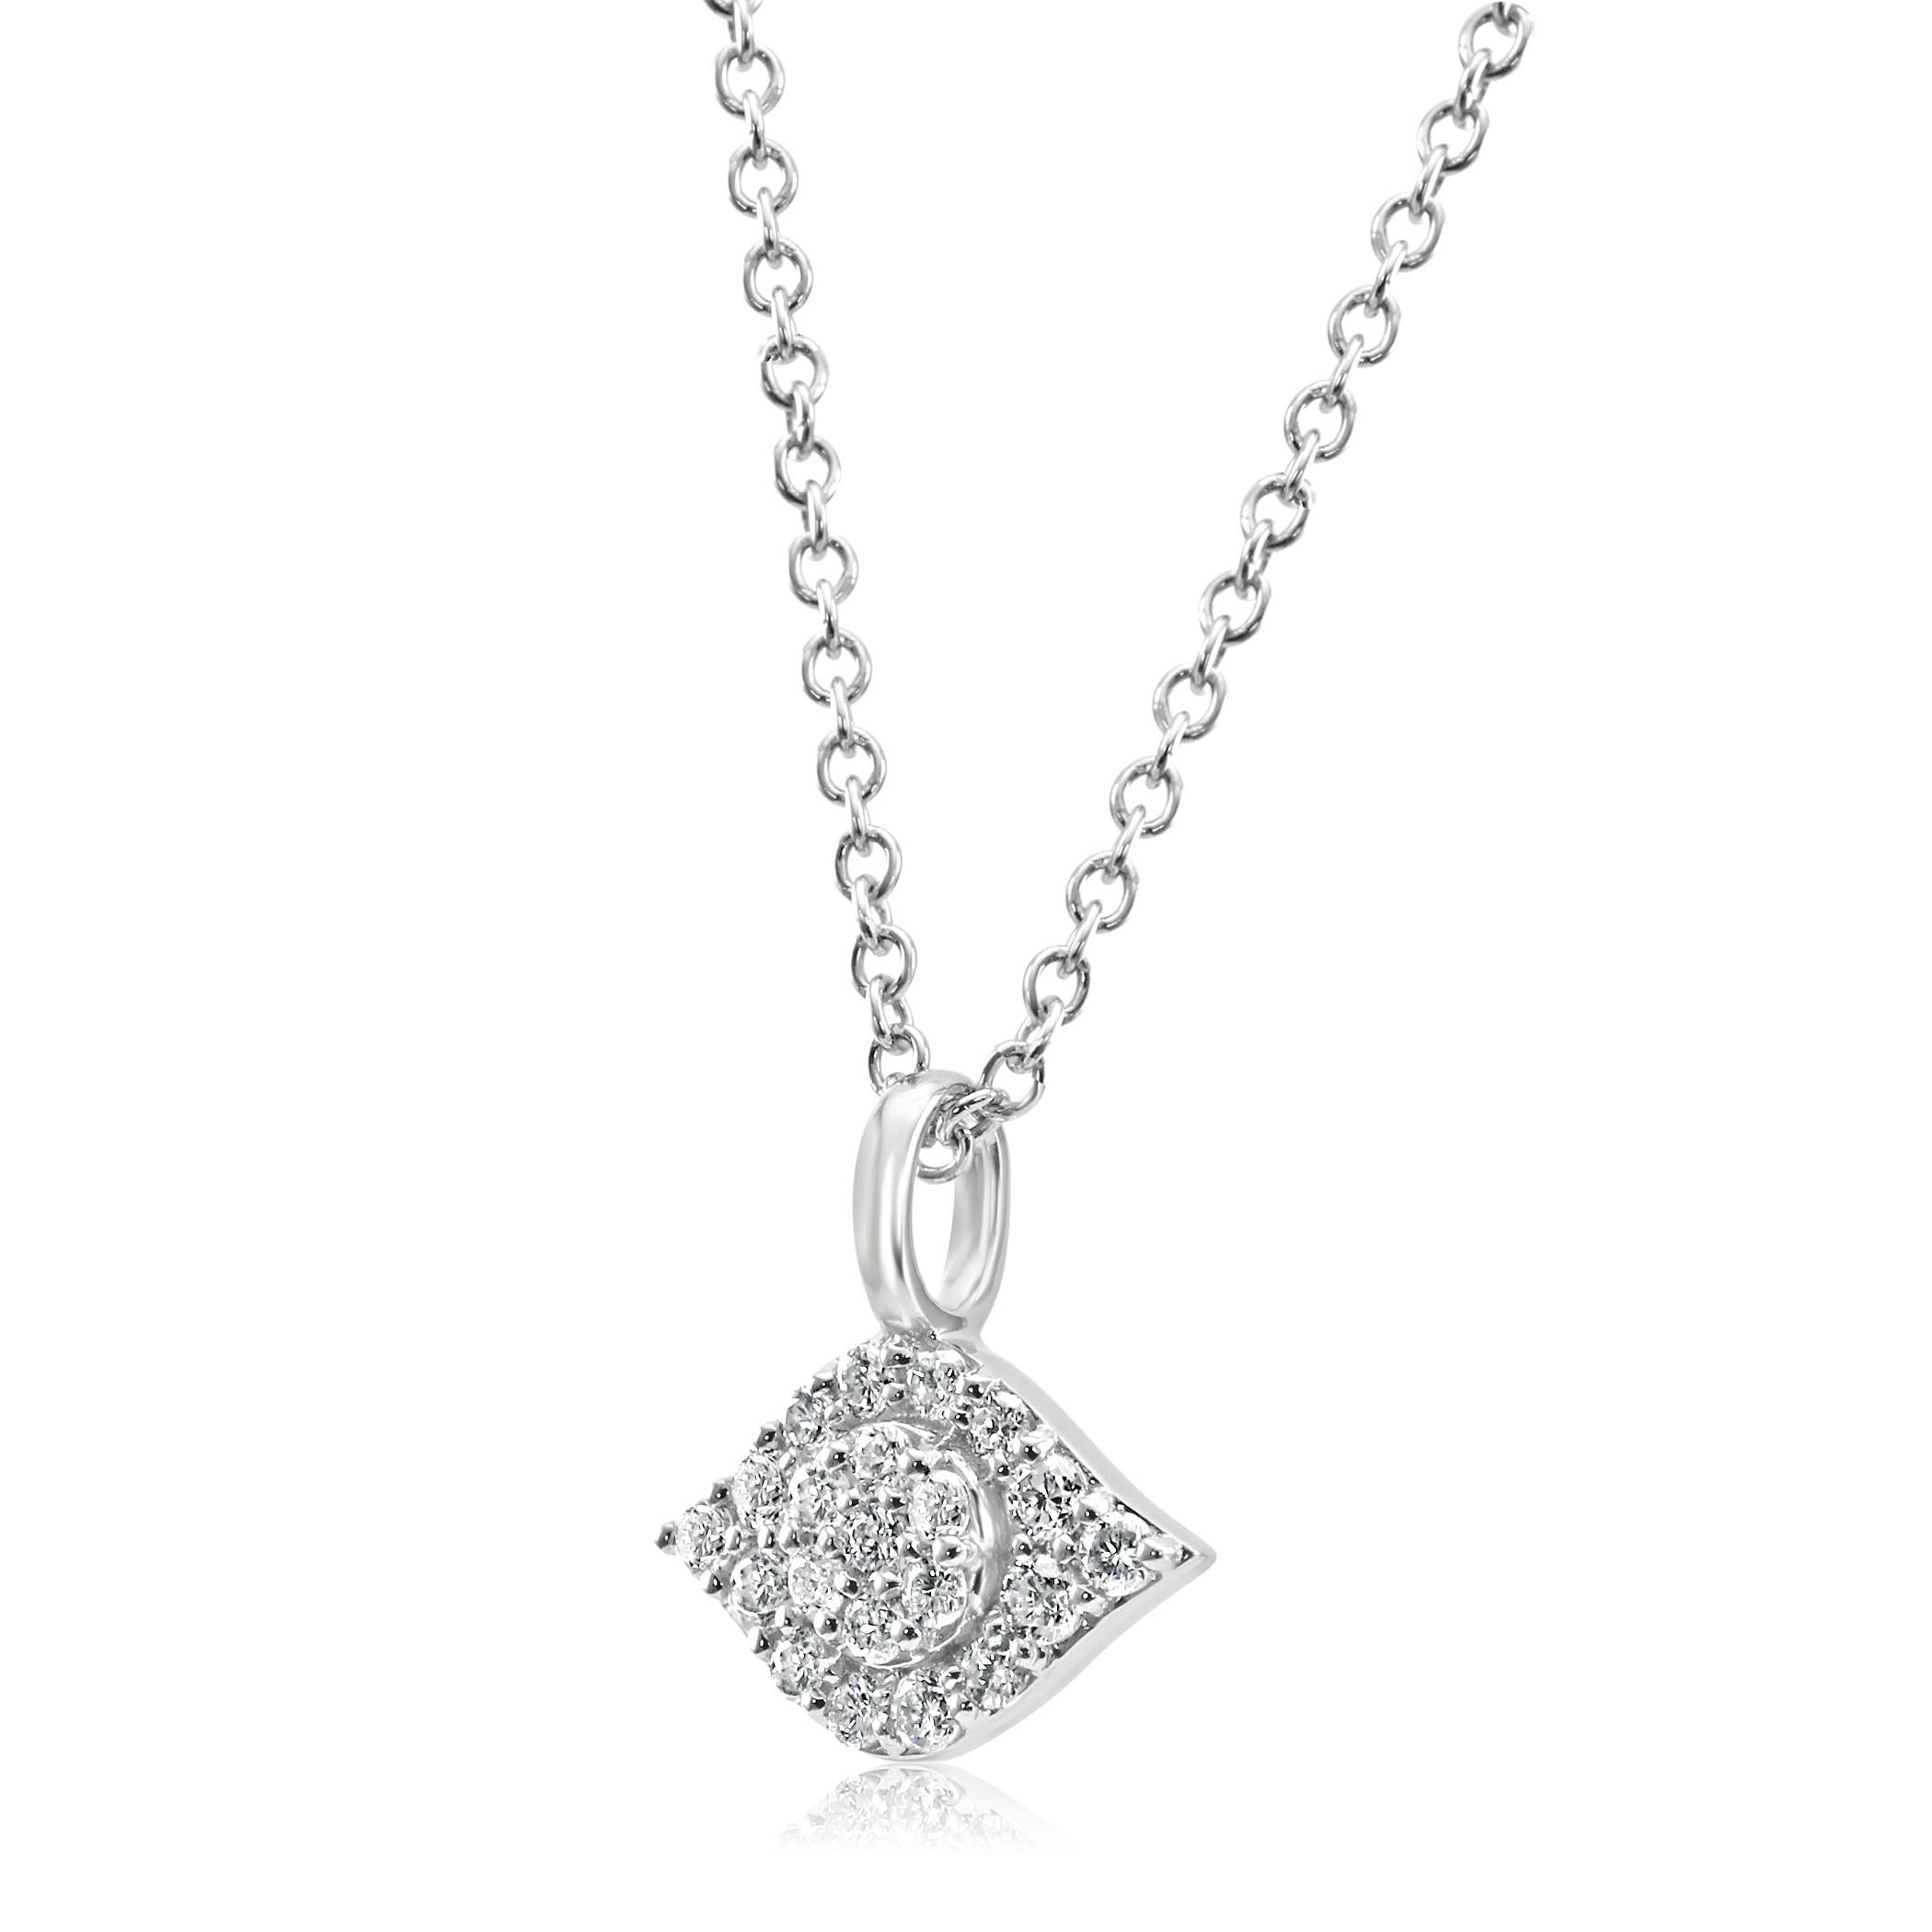 21 White Colorless SI Clarity Diamond Rounds 0.20 Carat Set in Stylish everyday wear 14K White Gold Evil Eye Dangle Drop Pendant Chain Necklace. Can be worn as 18 inches or 16 inches. 

Total Diamond Weight 0.20 Carat

Style available in all gold